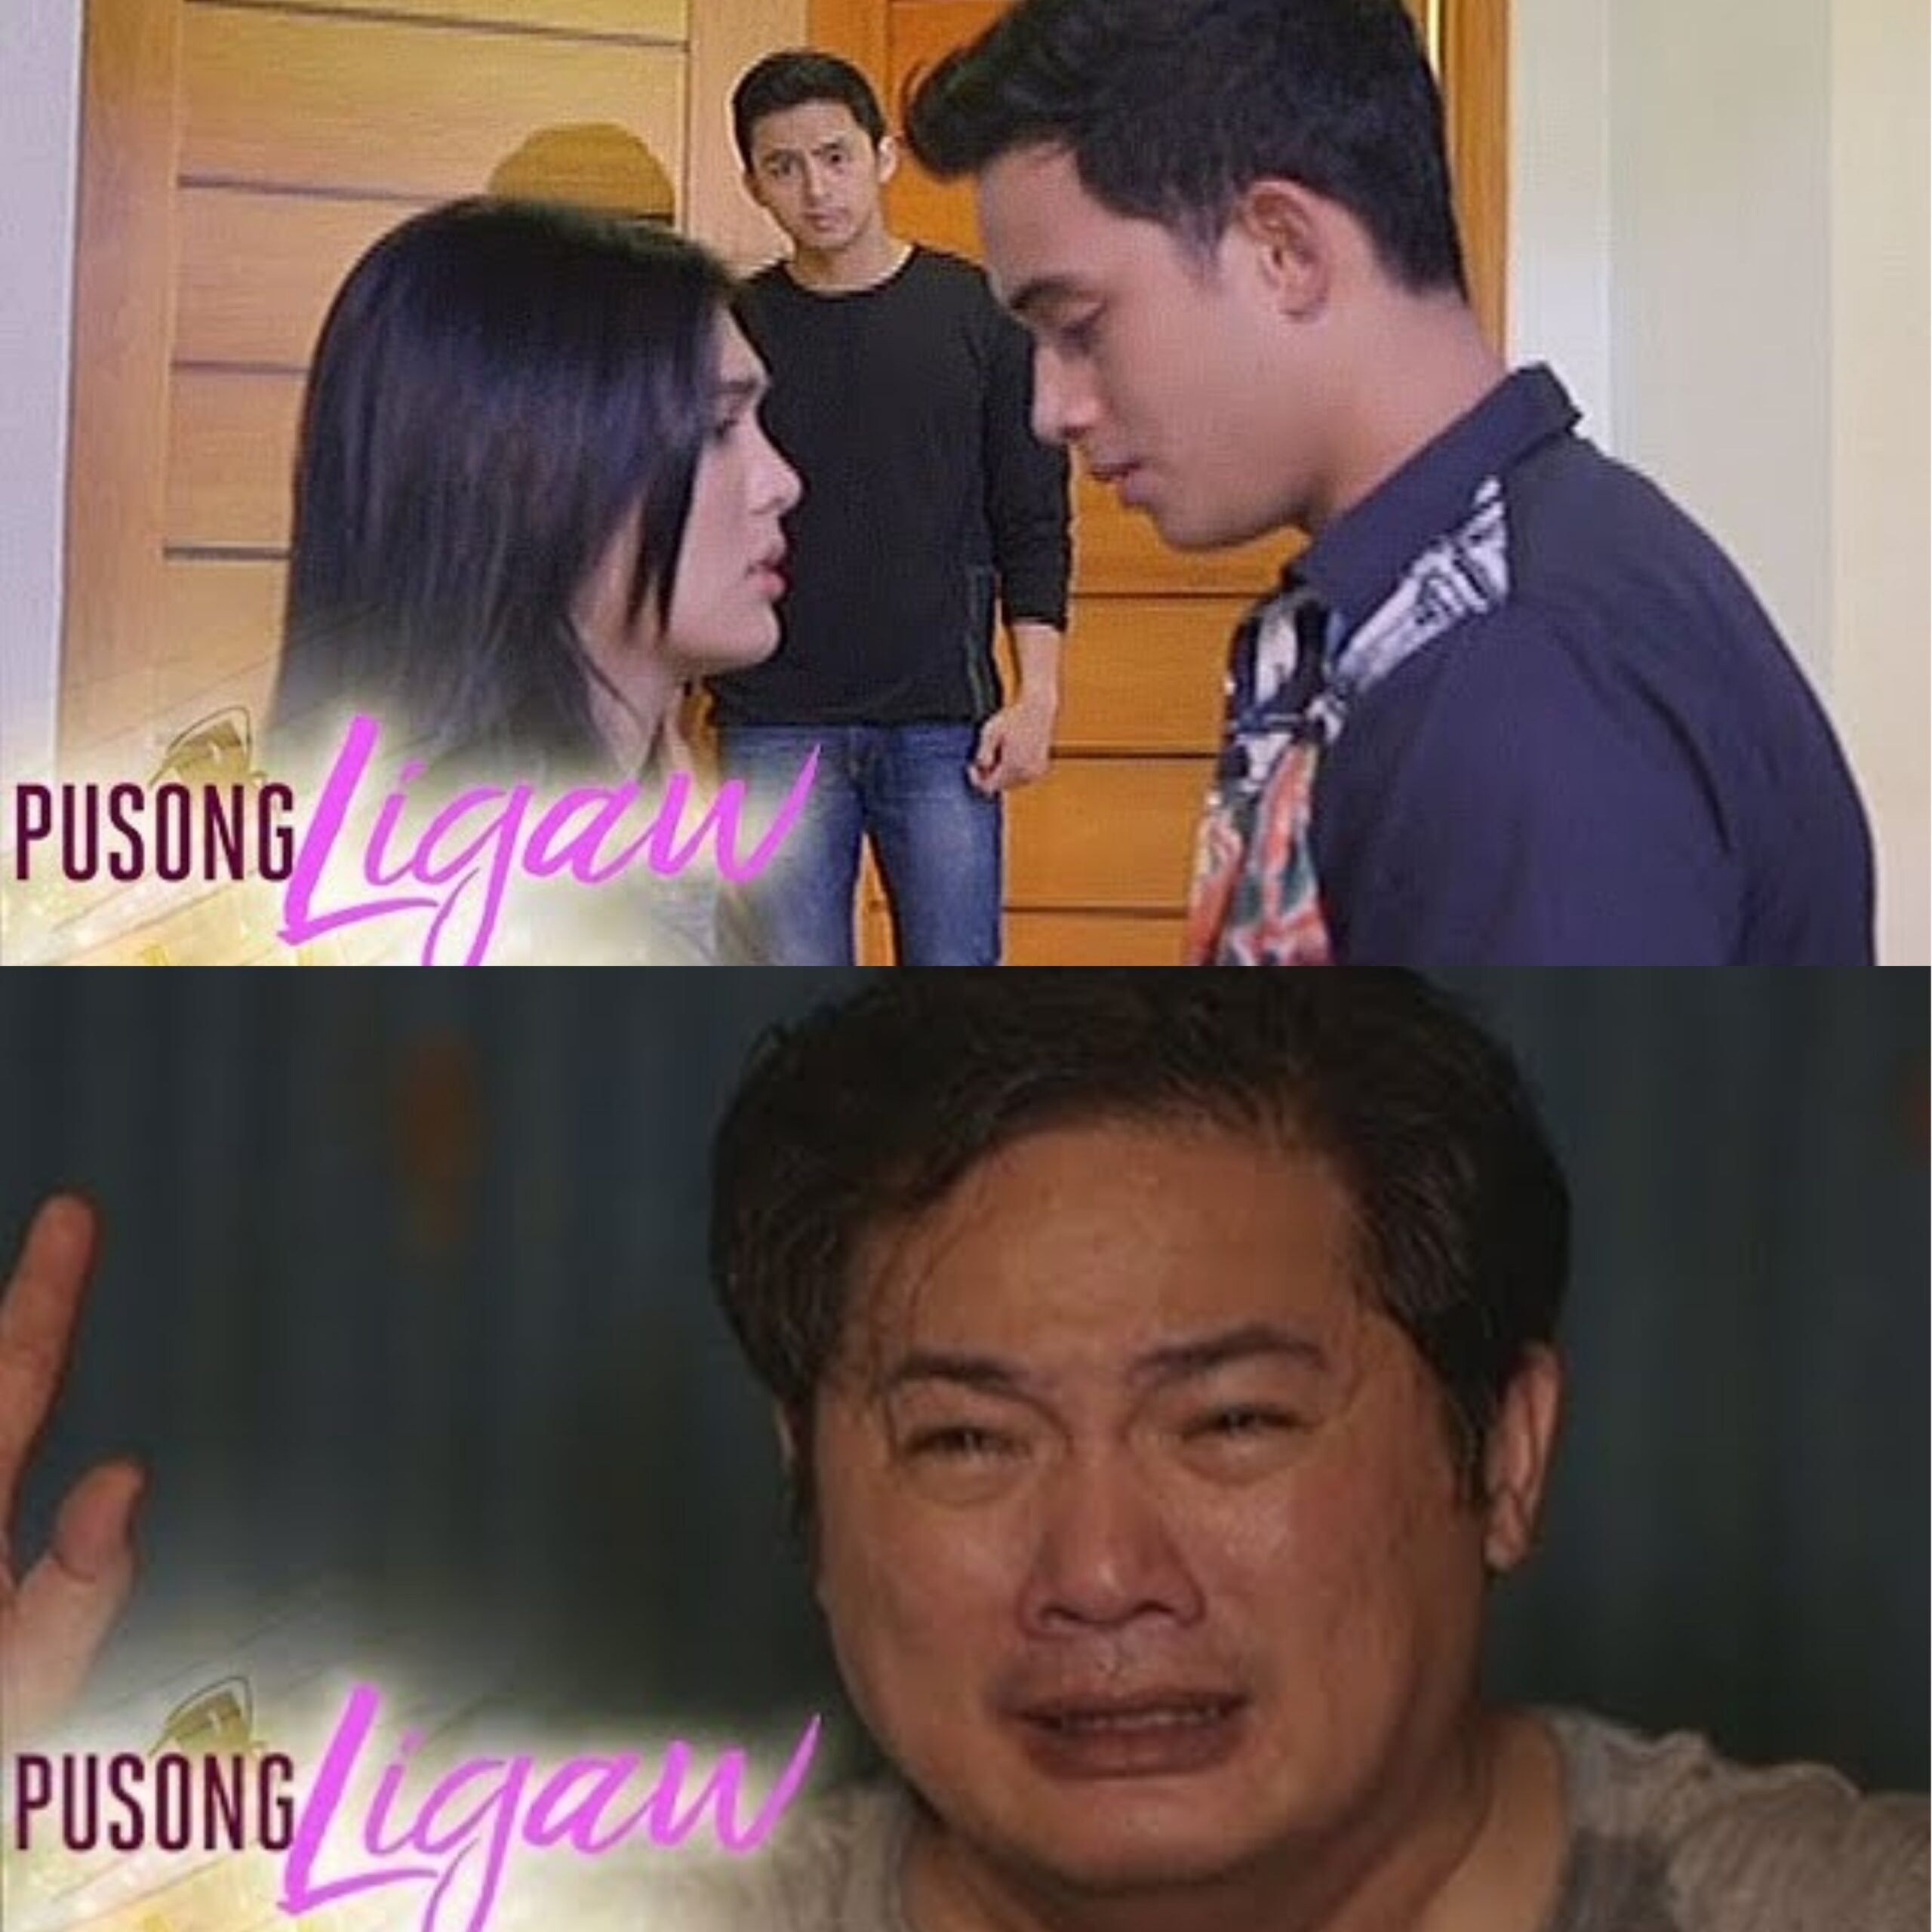 Lost Hearts (Pusong Ligaw) Highlights Episode 46-50